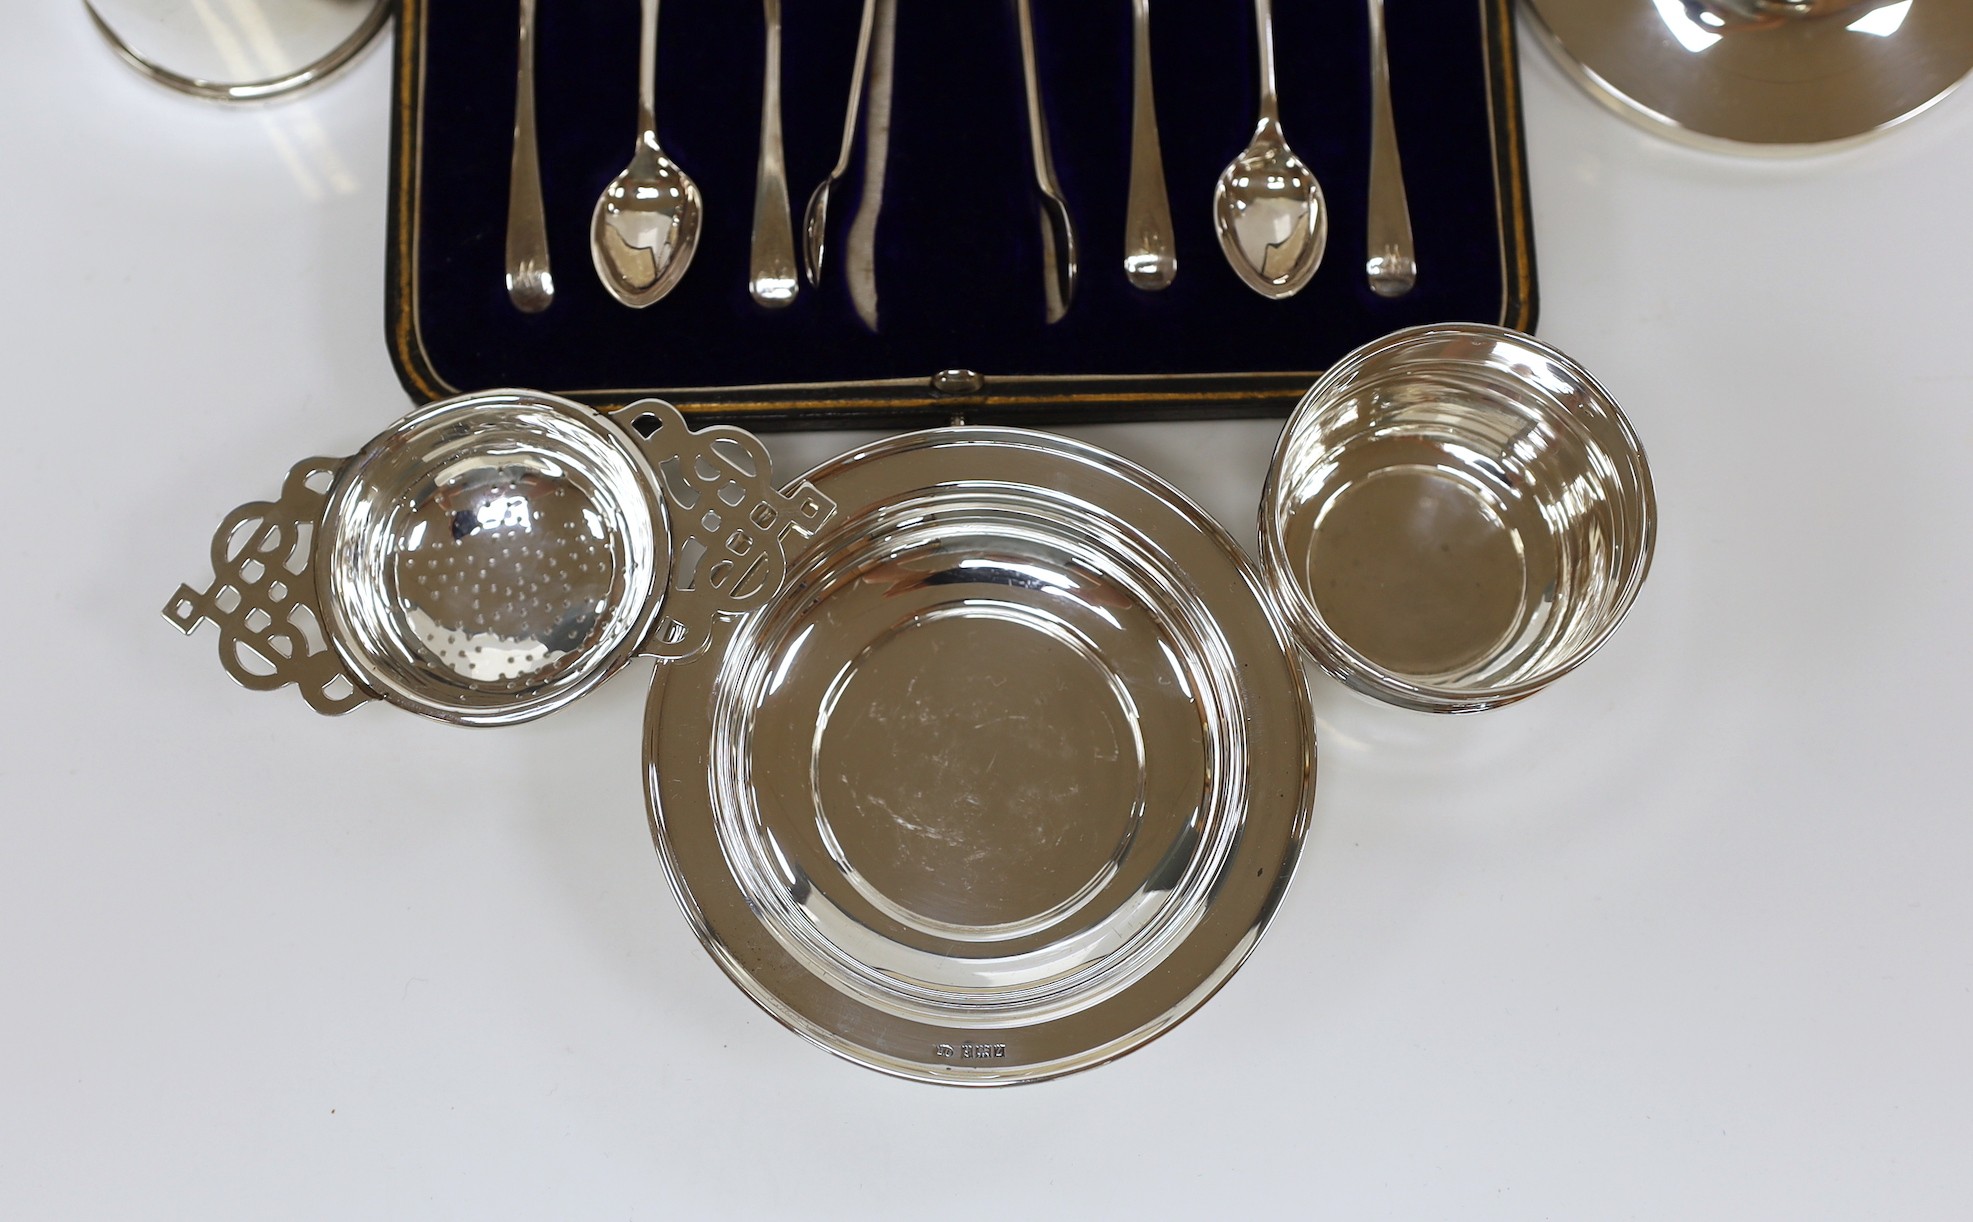 Small silver including a mounted inkwell, tea strainer on stand, mustard pot, small dish and cased set of six coffee spoons with sugar tongs.